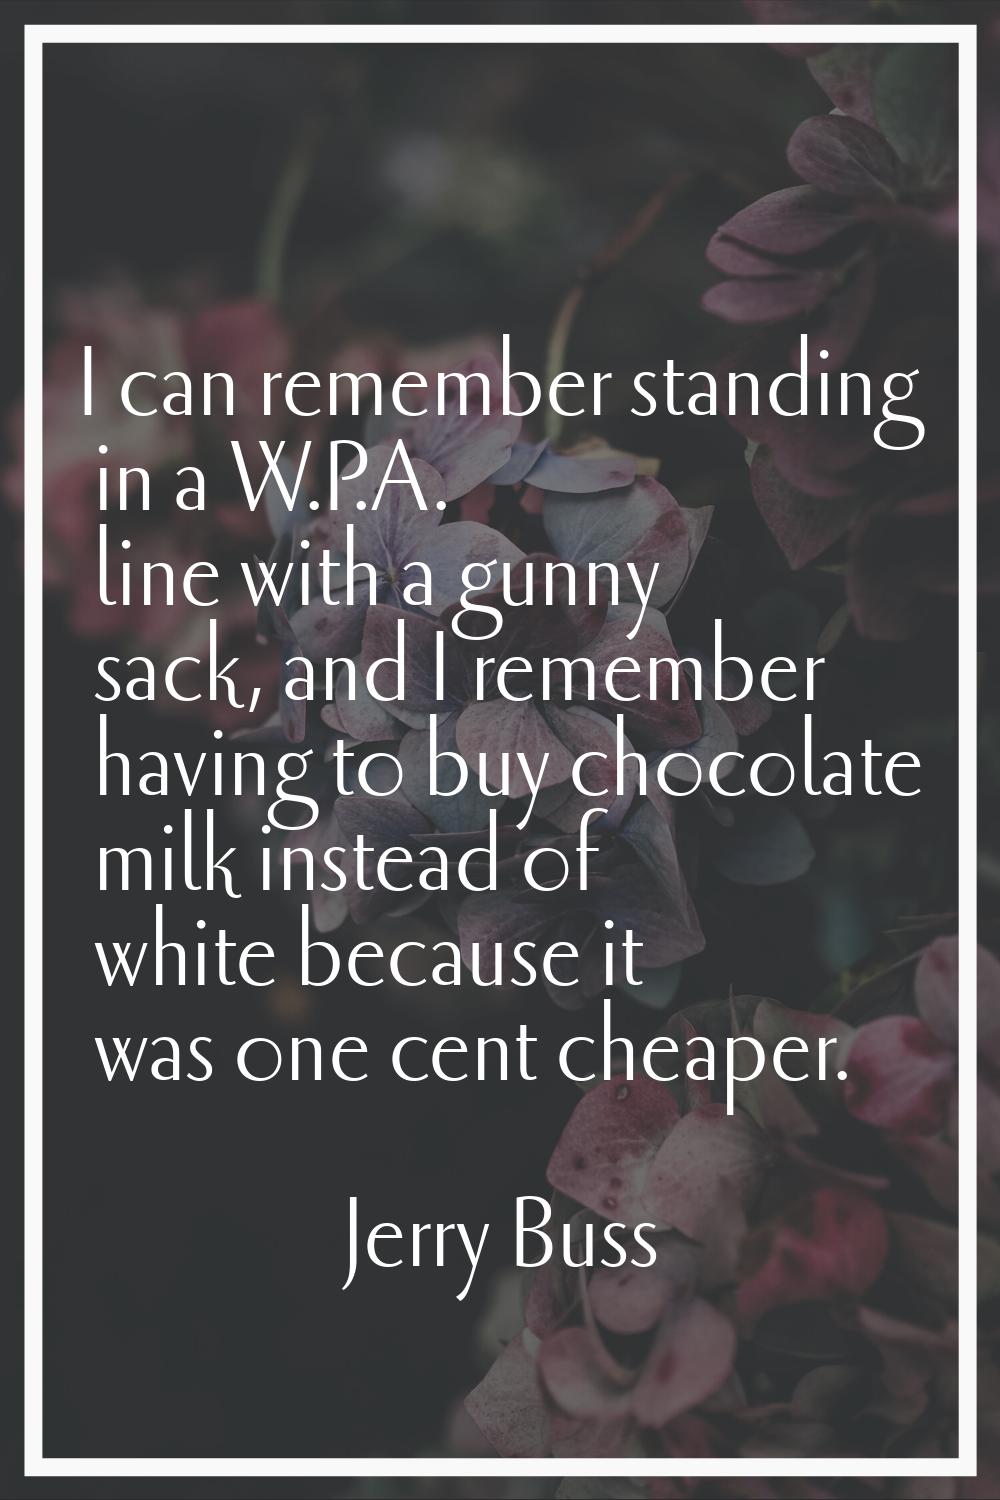 I can remember standing in a W.P.A. line with a gunny sack, and I remember having to buy chocolate 